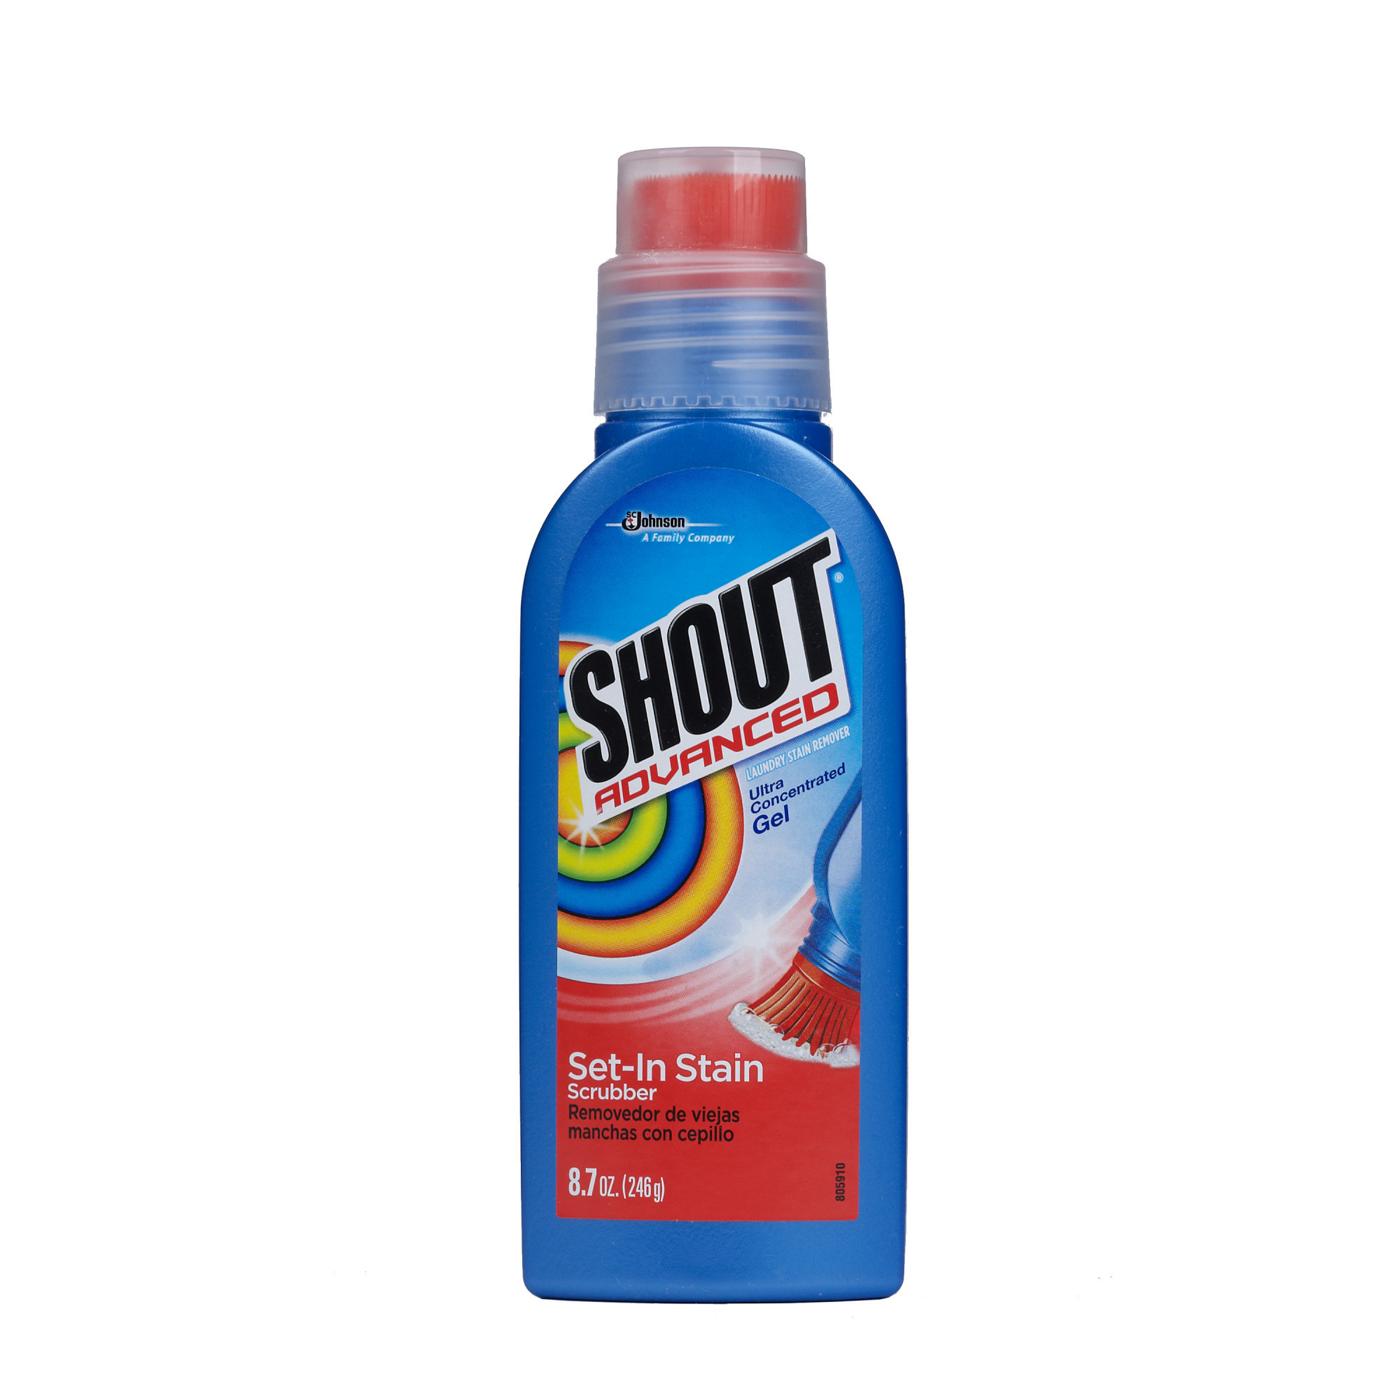 Shout Advanced Ultra Concentrated Gel Laundry Stain Remover; image 1 of 9